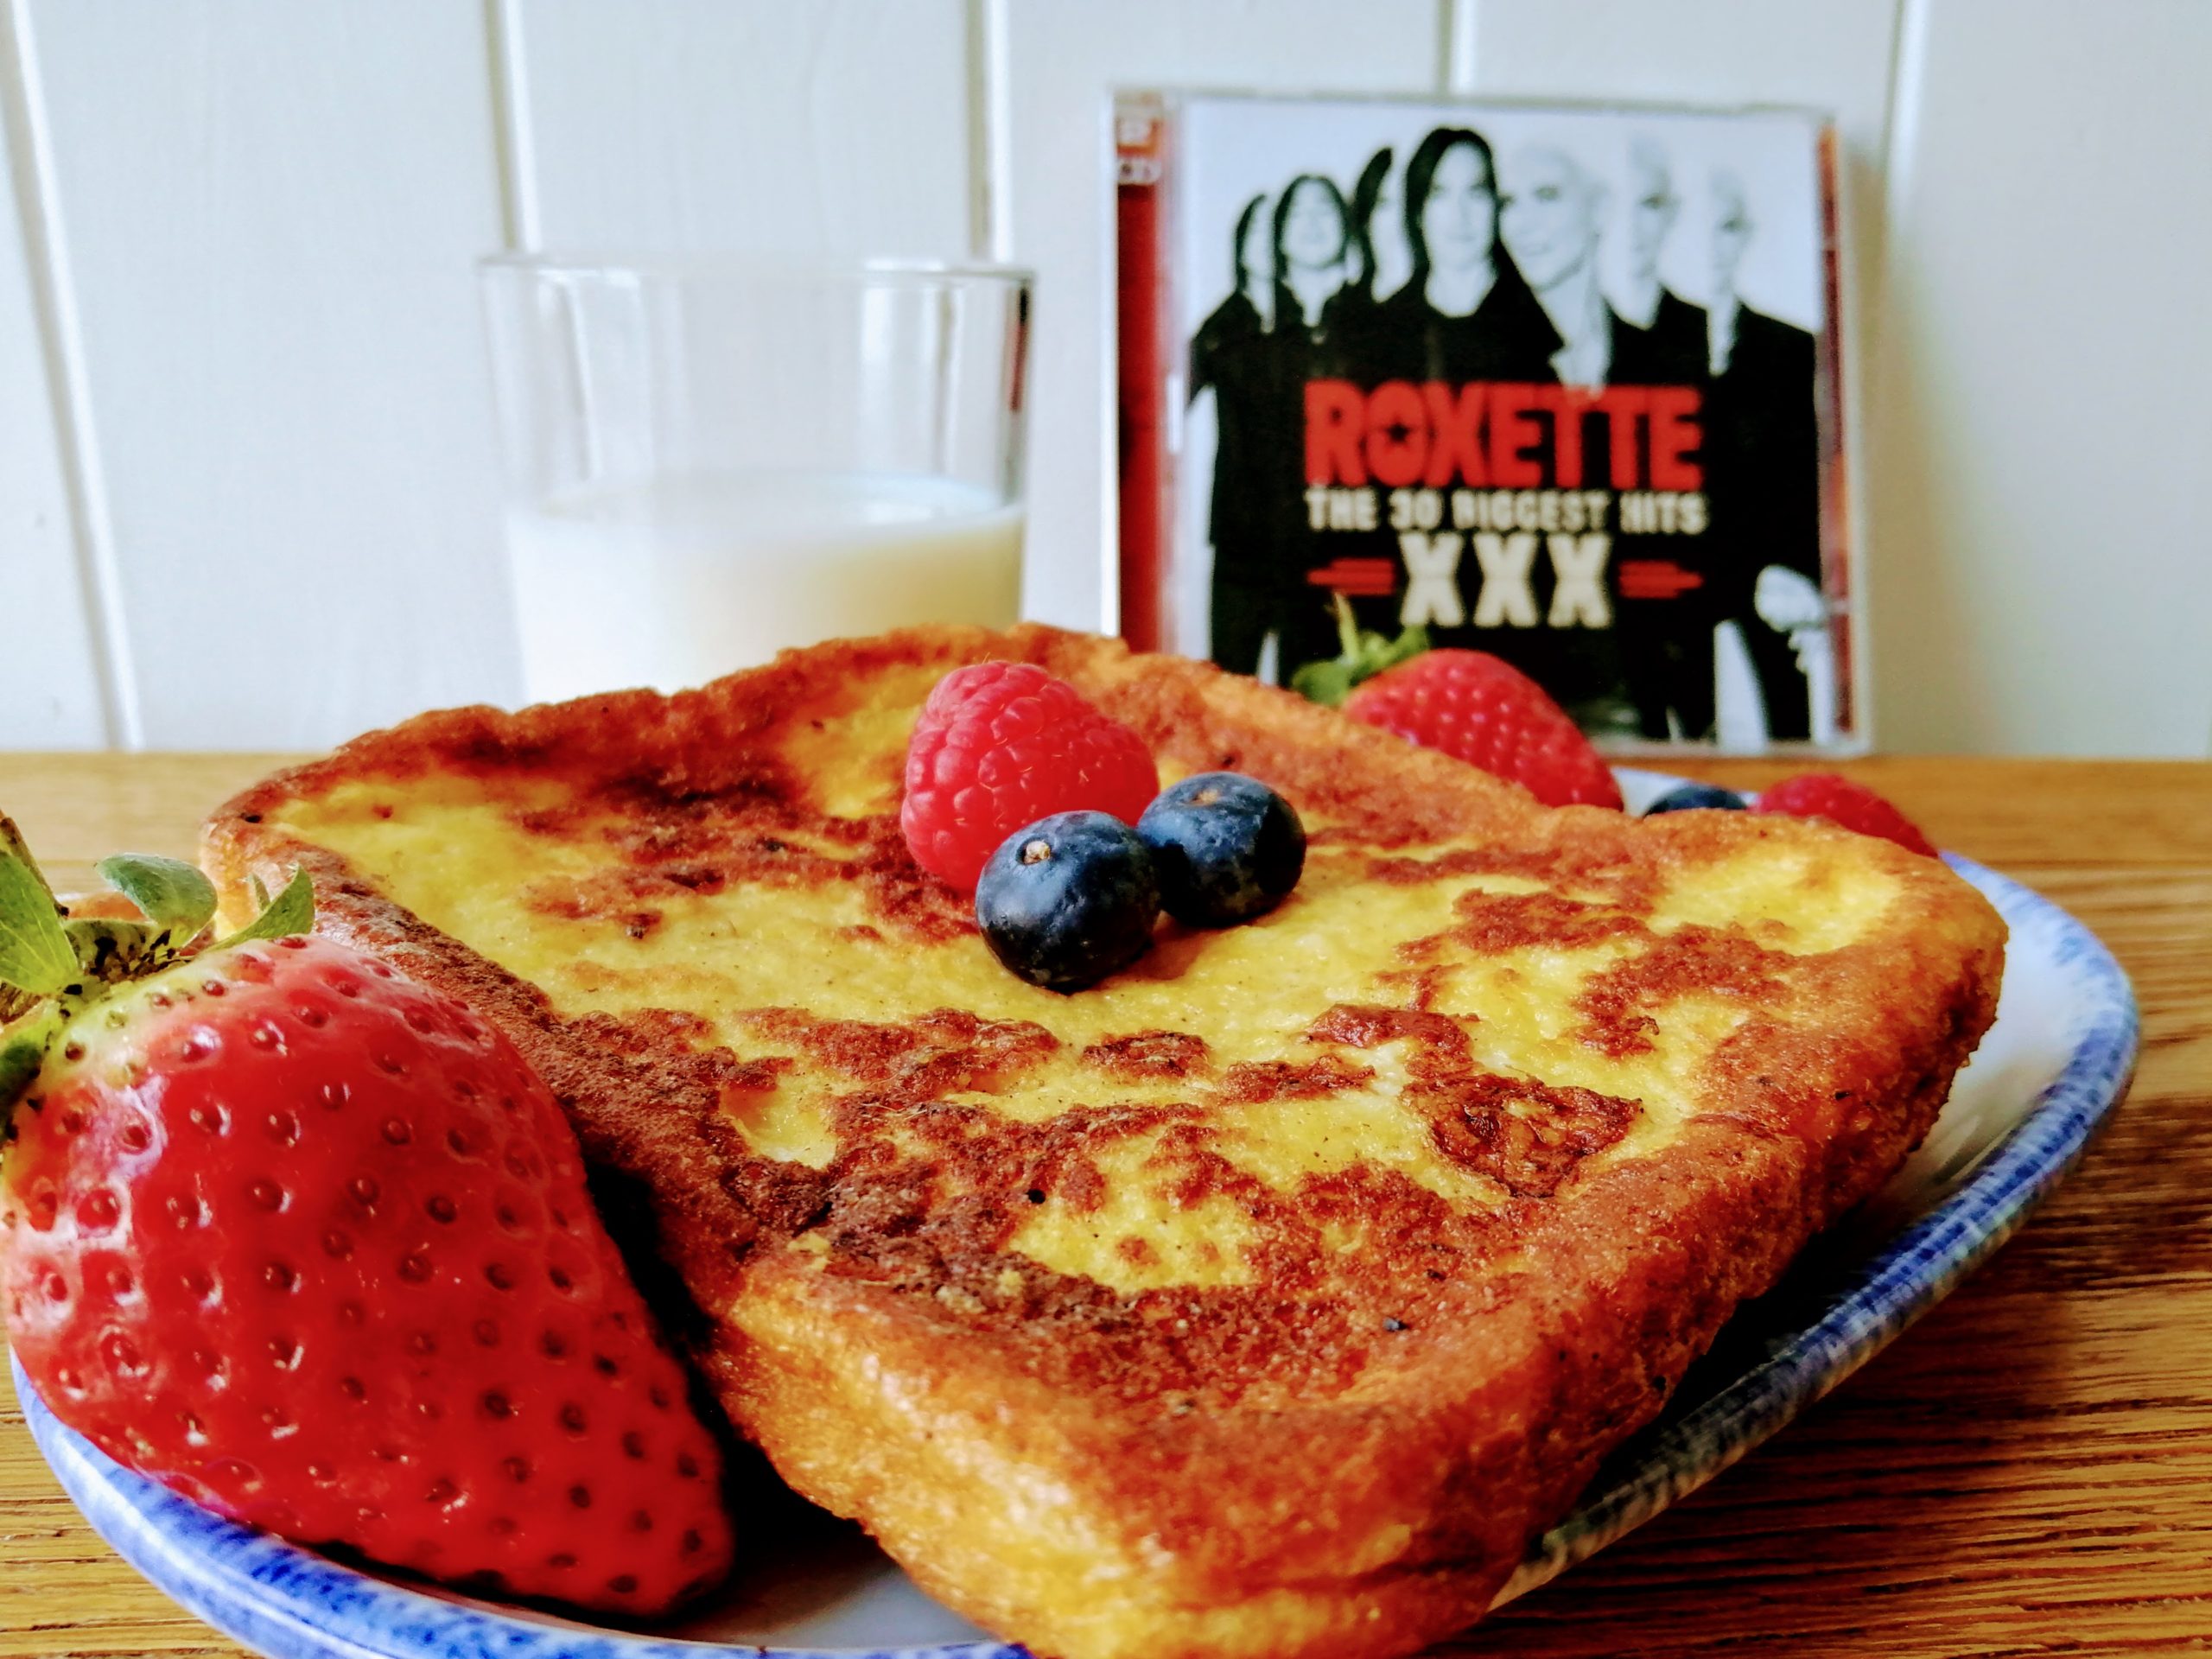 French Toast mit Roxette